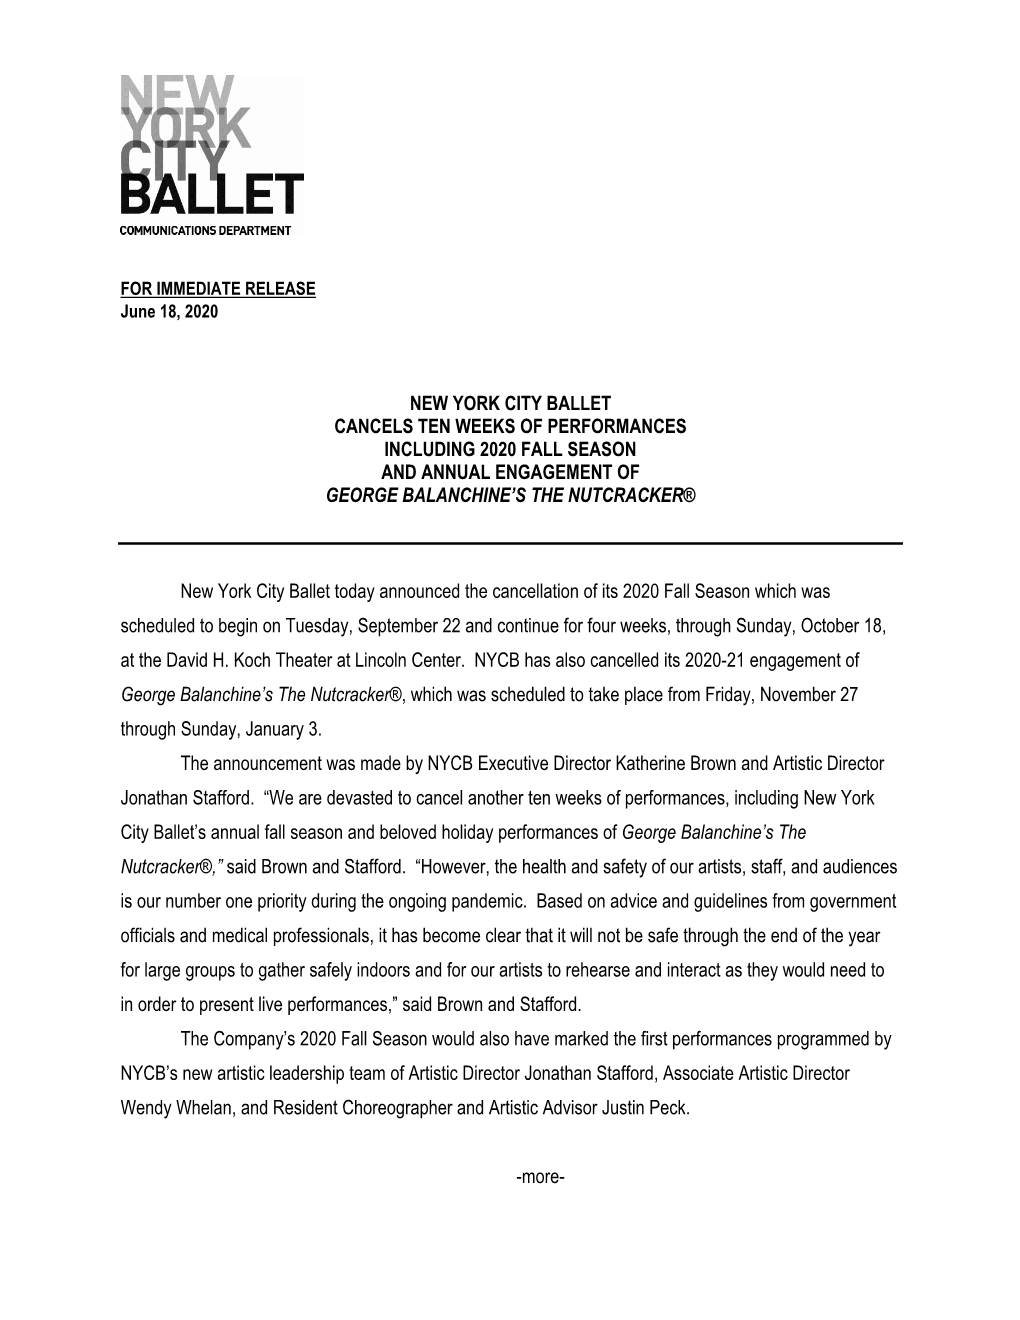 New York City Ballet Cancels Ten Weeks of Performances Including 2020 Fall Season and Annual Engagement of George Balanchine’S the Nutcracker®